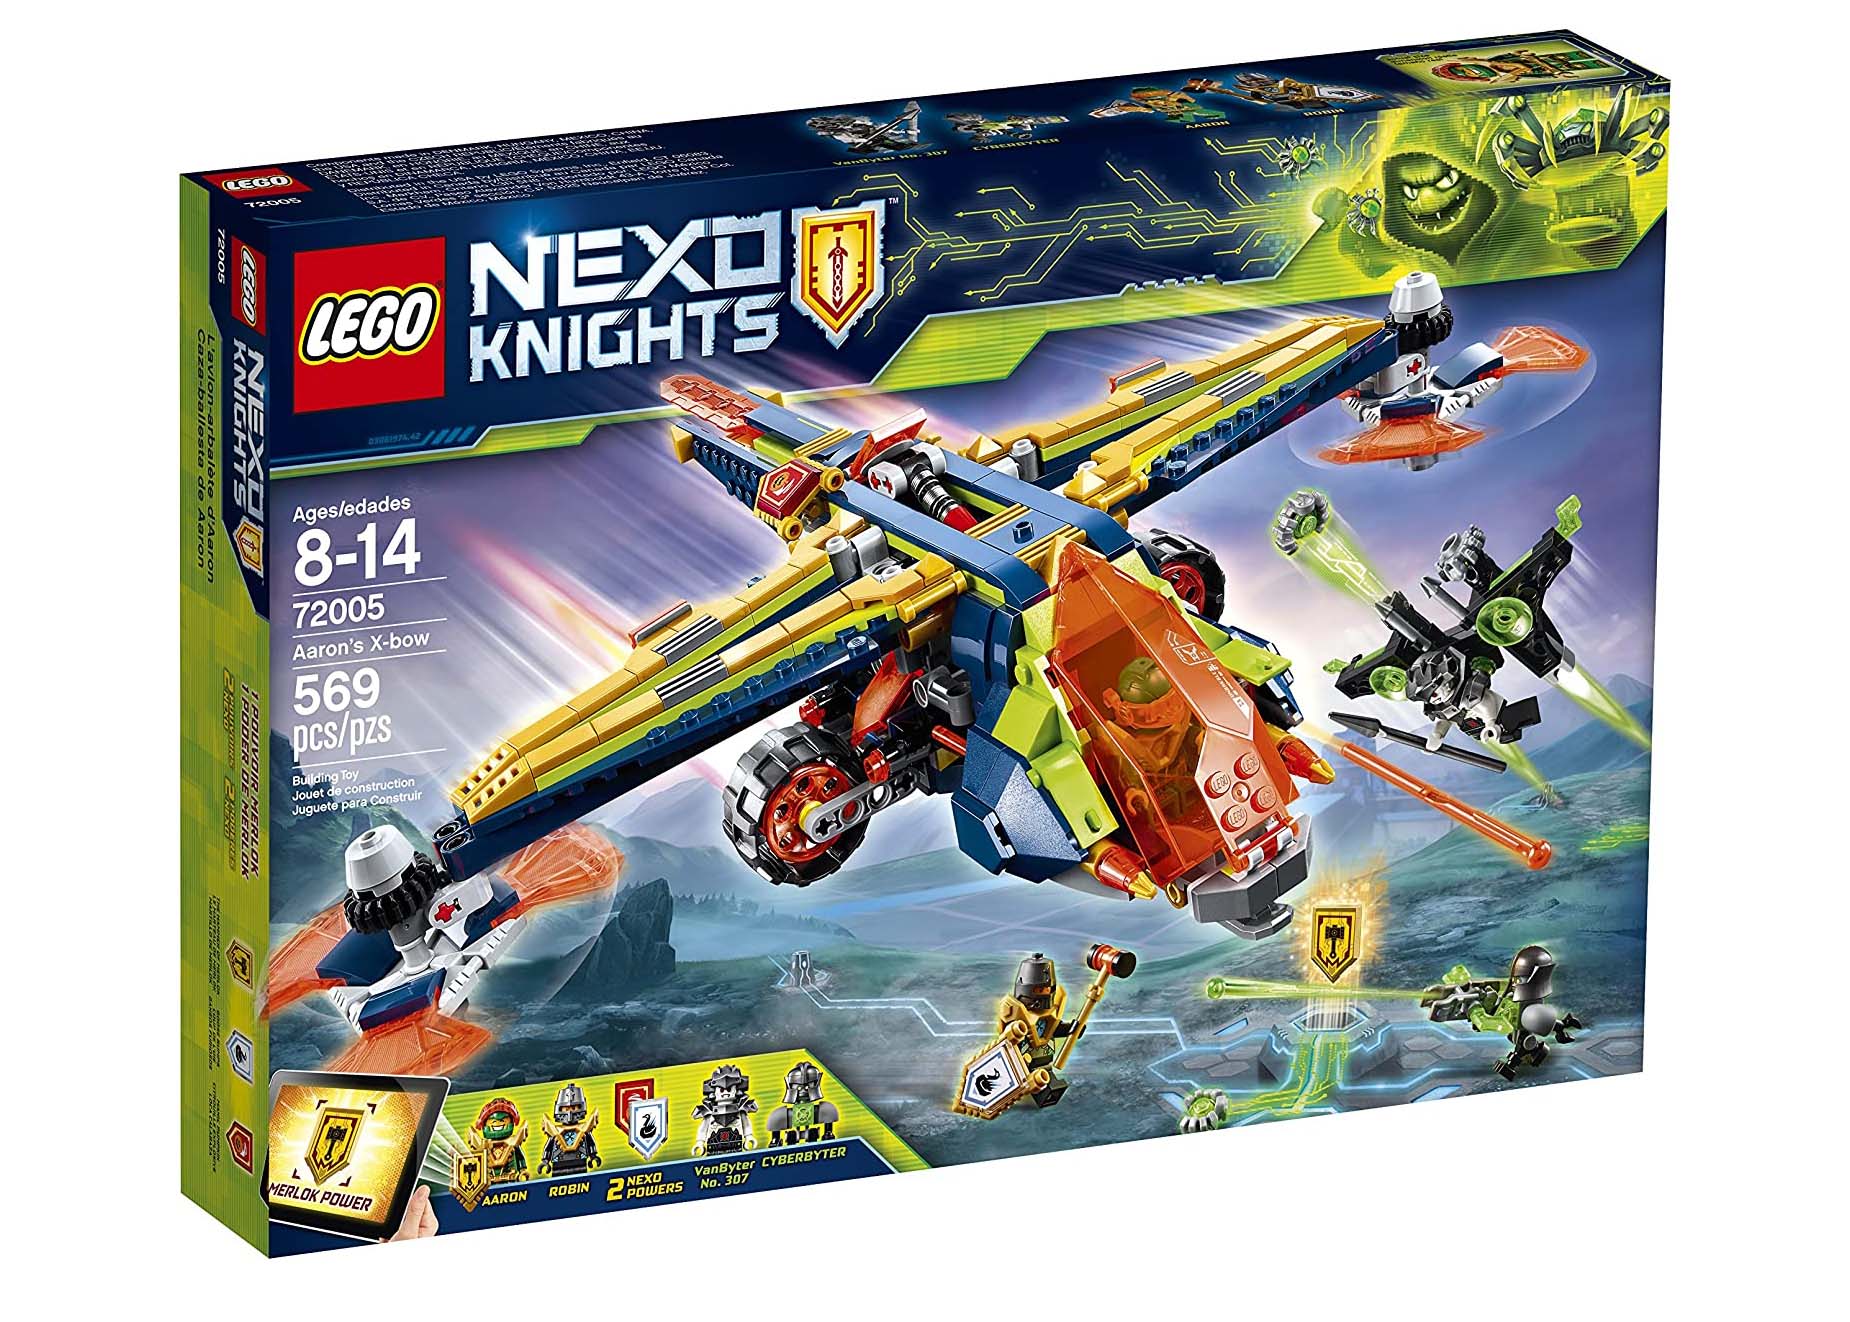 LEGO Nexo Knights The Fortrex Set 70317 - US